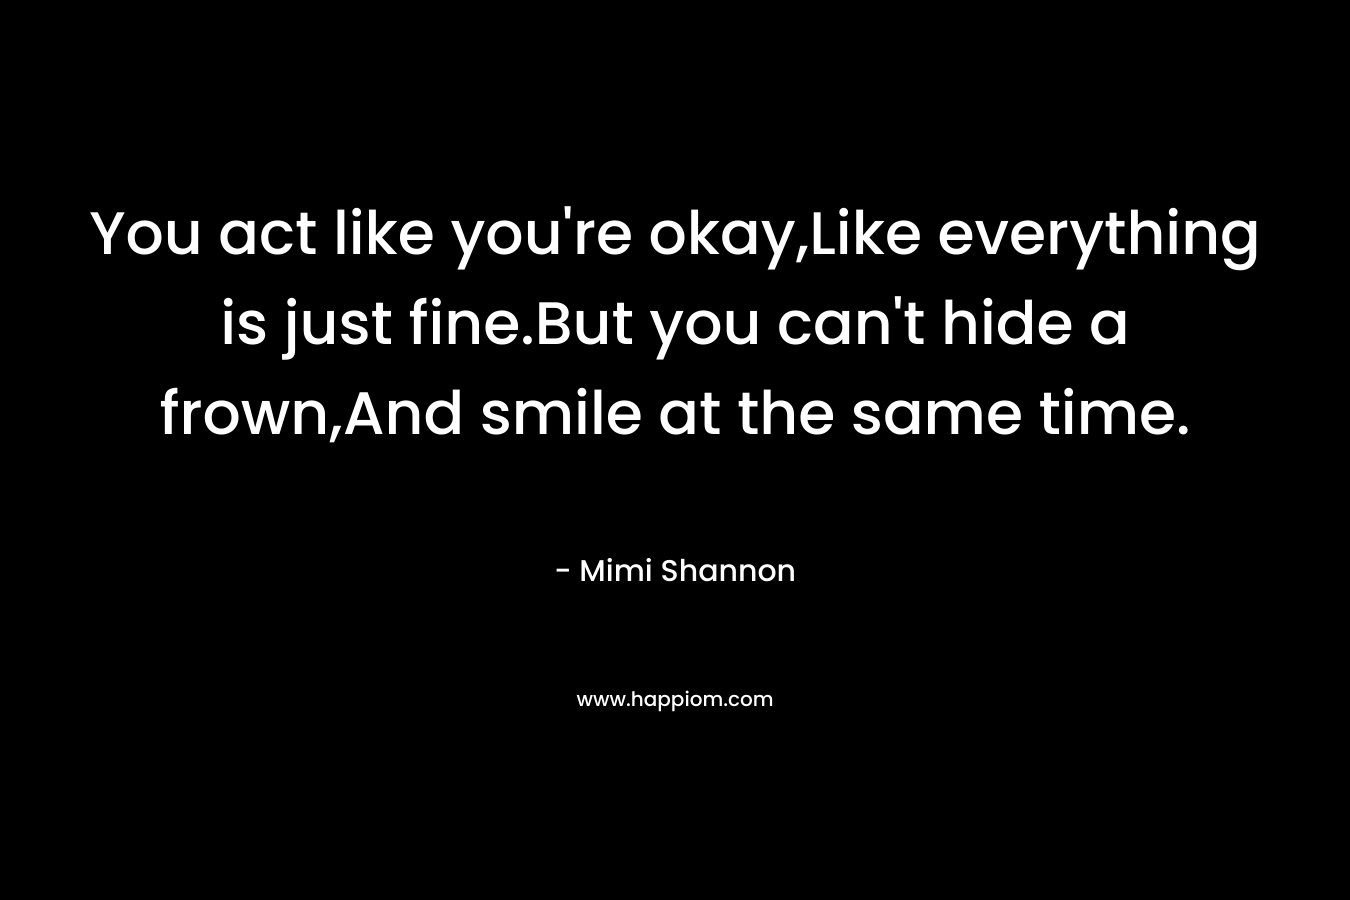 You act like you're okay,Like everything is just fine.But you can't hide a frown,And smile at the same time.